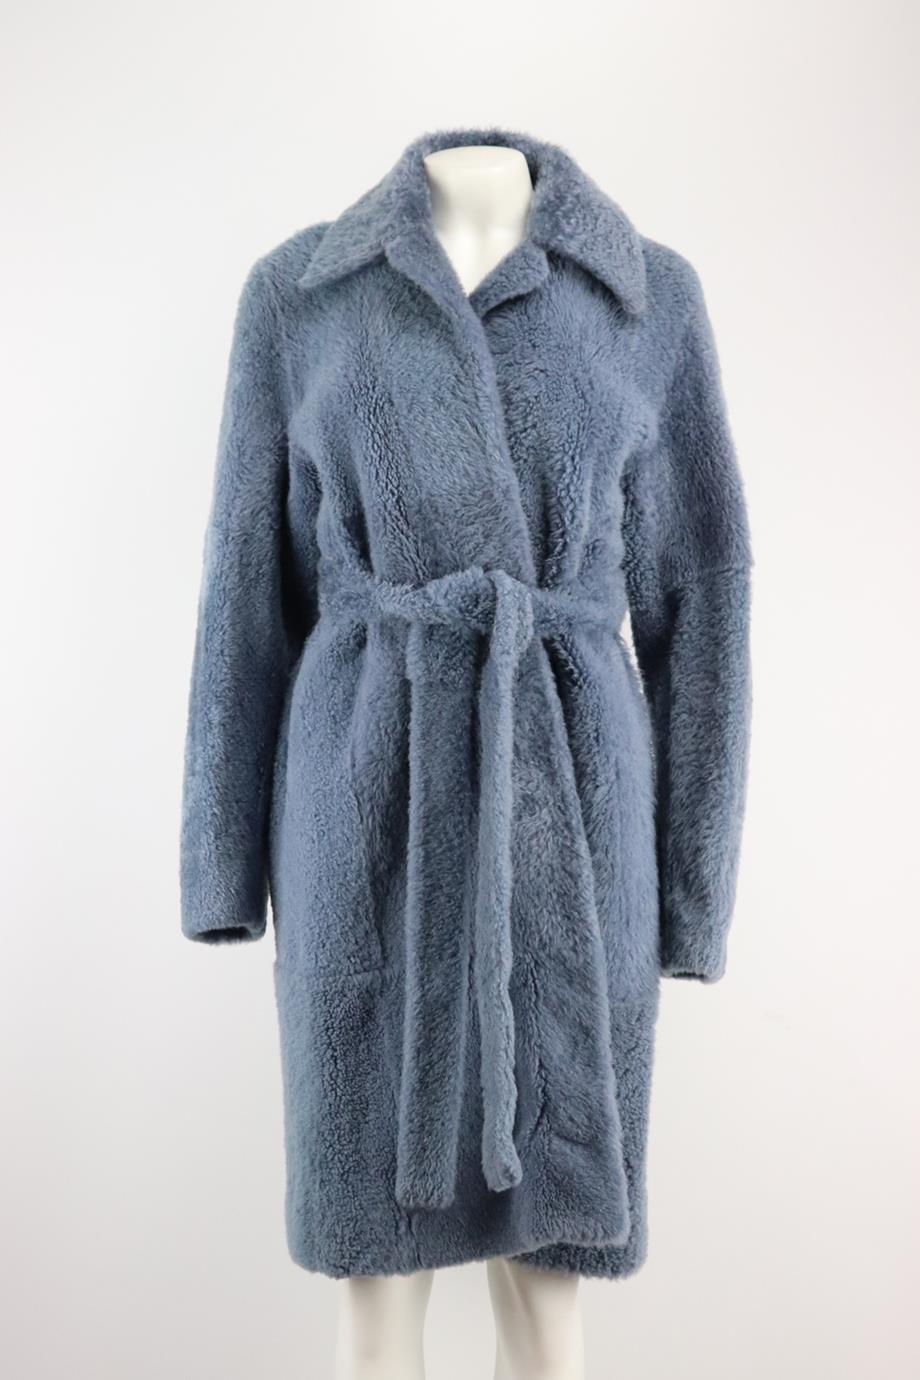 Celine belted shearling coat. Blue. Long sleeve, v-neck. Tie fastening at front. 100% Shearling. Size: FR 38 (UK 10, US 6, IT 42). Shoulder to shoulder: 17 in. Bust: 42.3 in. Waist: 45 in. Hips: 51 in. Length: 38 in Very good condition - As new